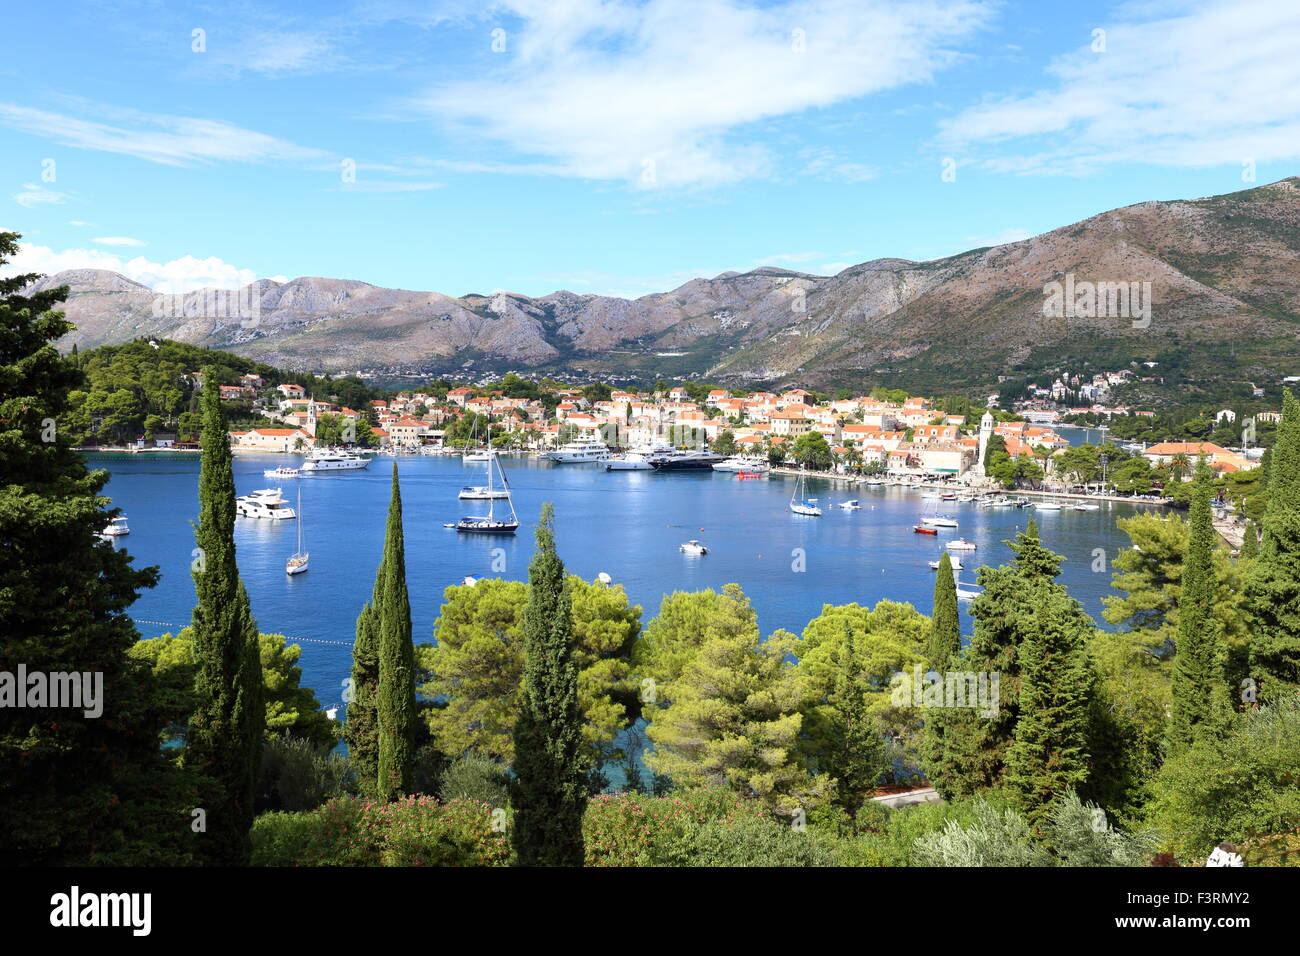 Cavtat harbour, seen from an elevated angle, edged with pine trees the harbour and small town look beautiful. Stock Photo